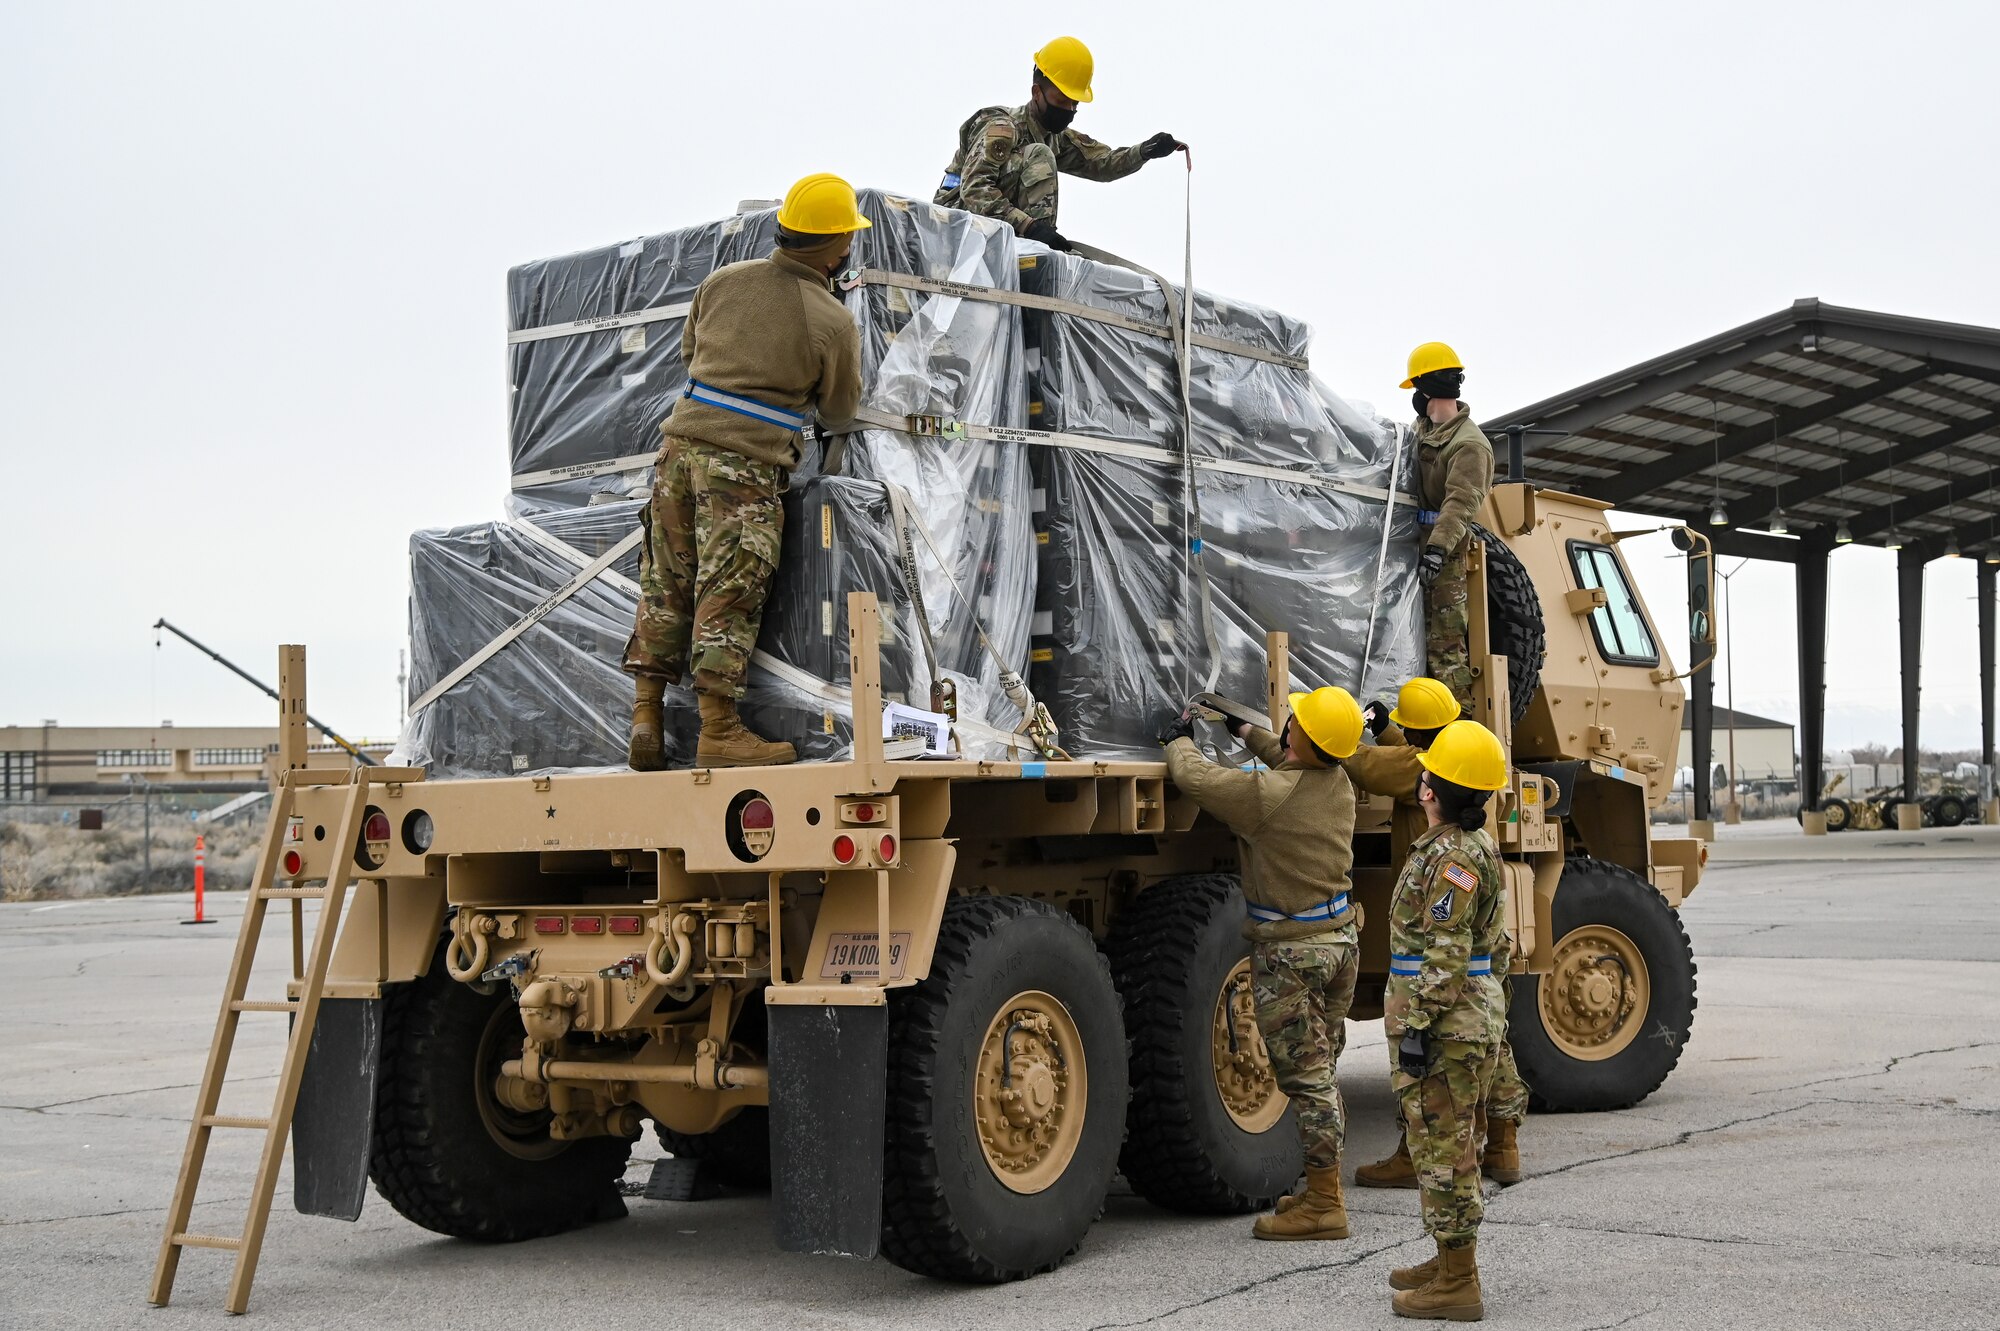 Six Airmen strapping down cargo on the bed of a military vehicle.